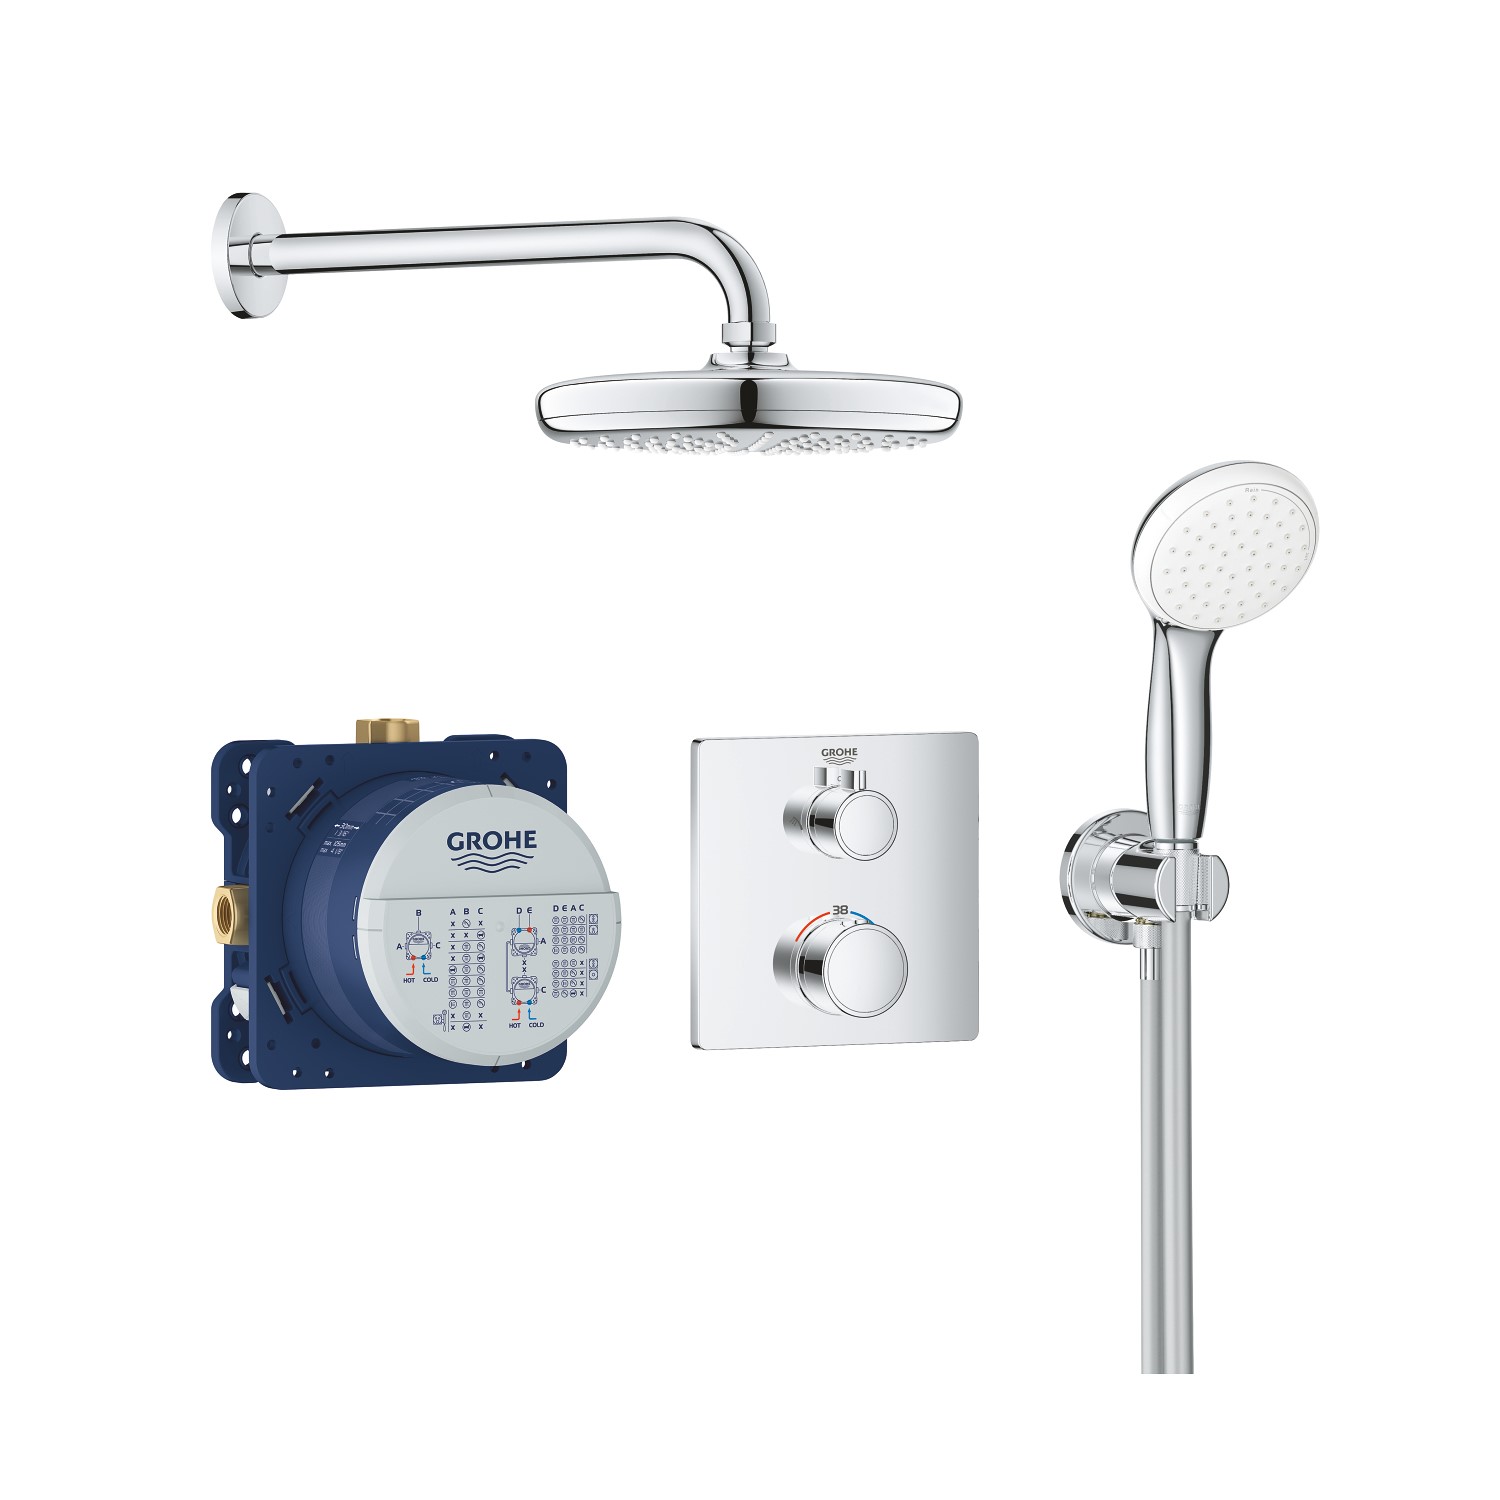 Grohe Tempesta 210 Concealed Thermostatic Mixer Shower with Ceiling Shower Head Handset & Square Val